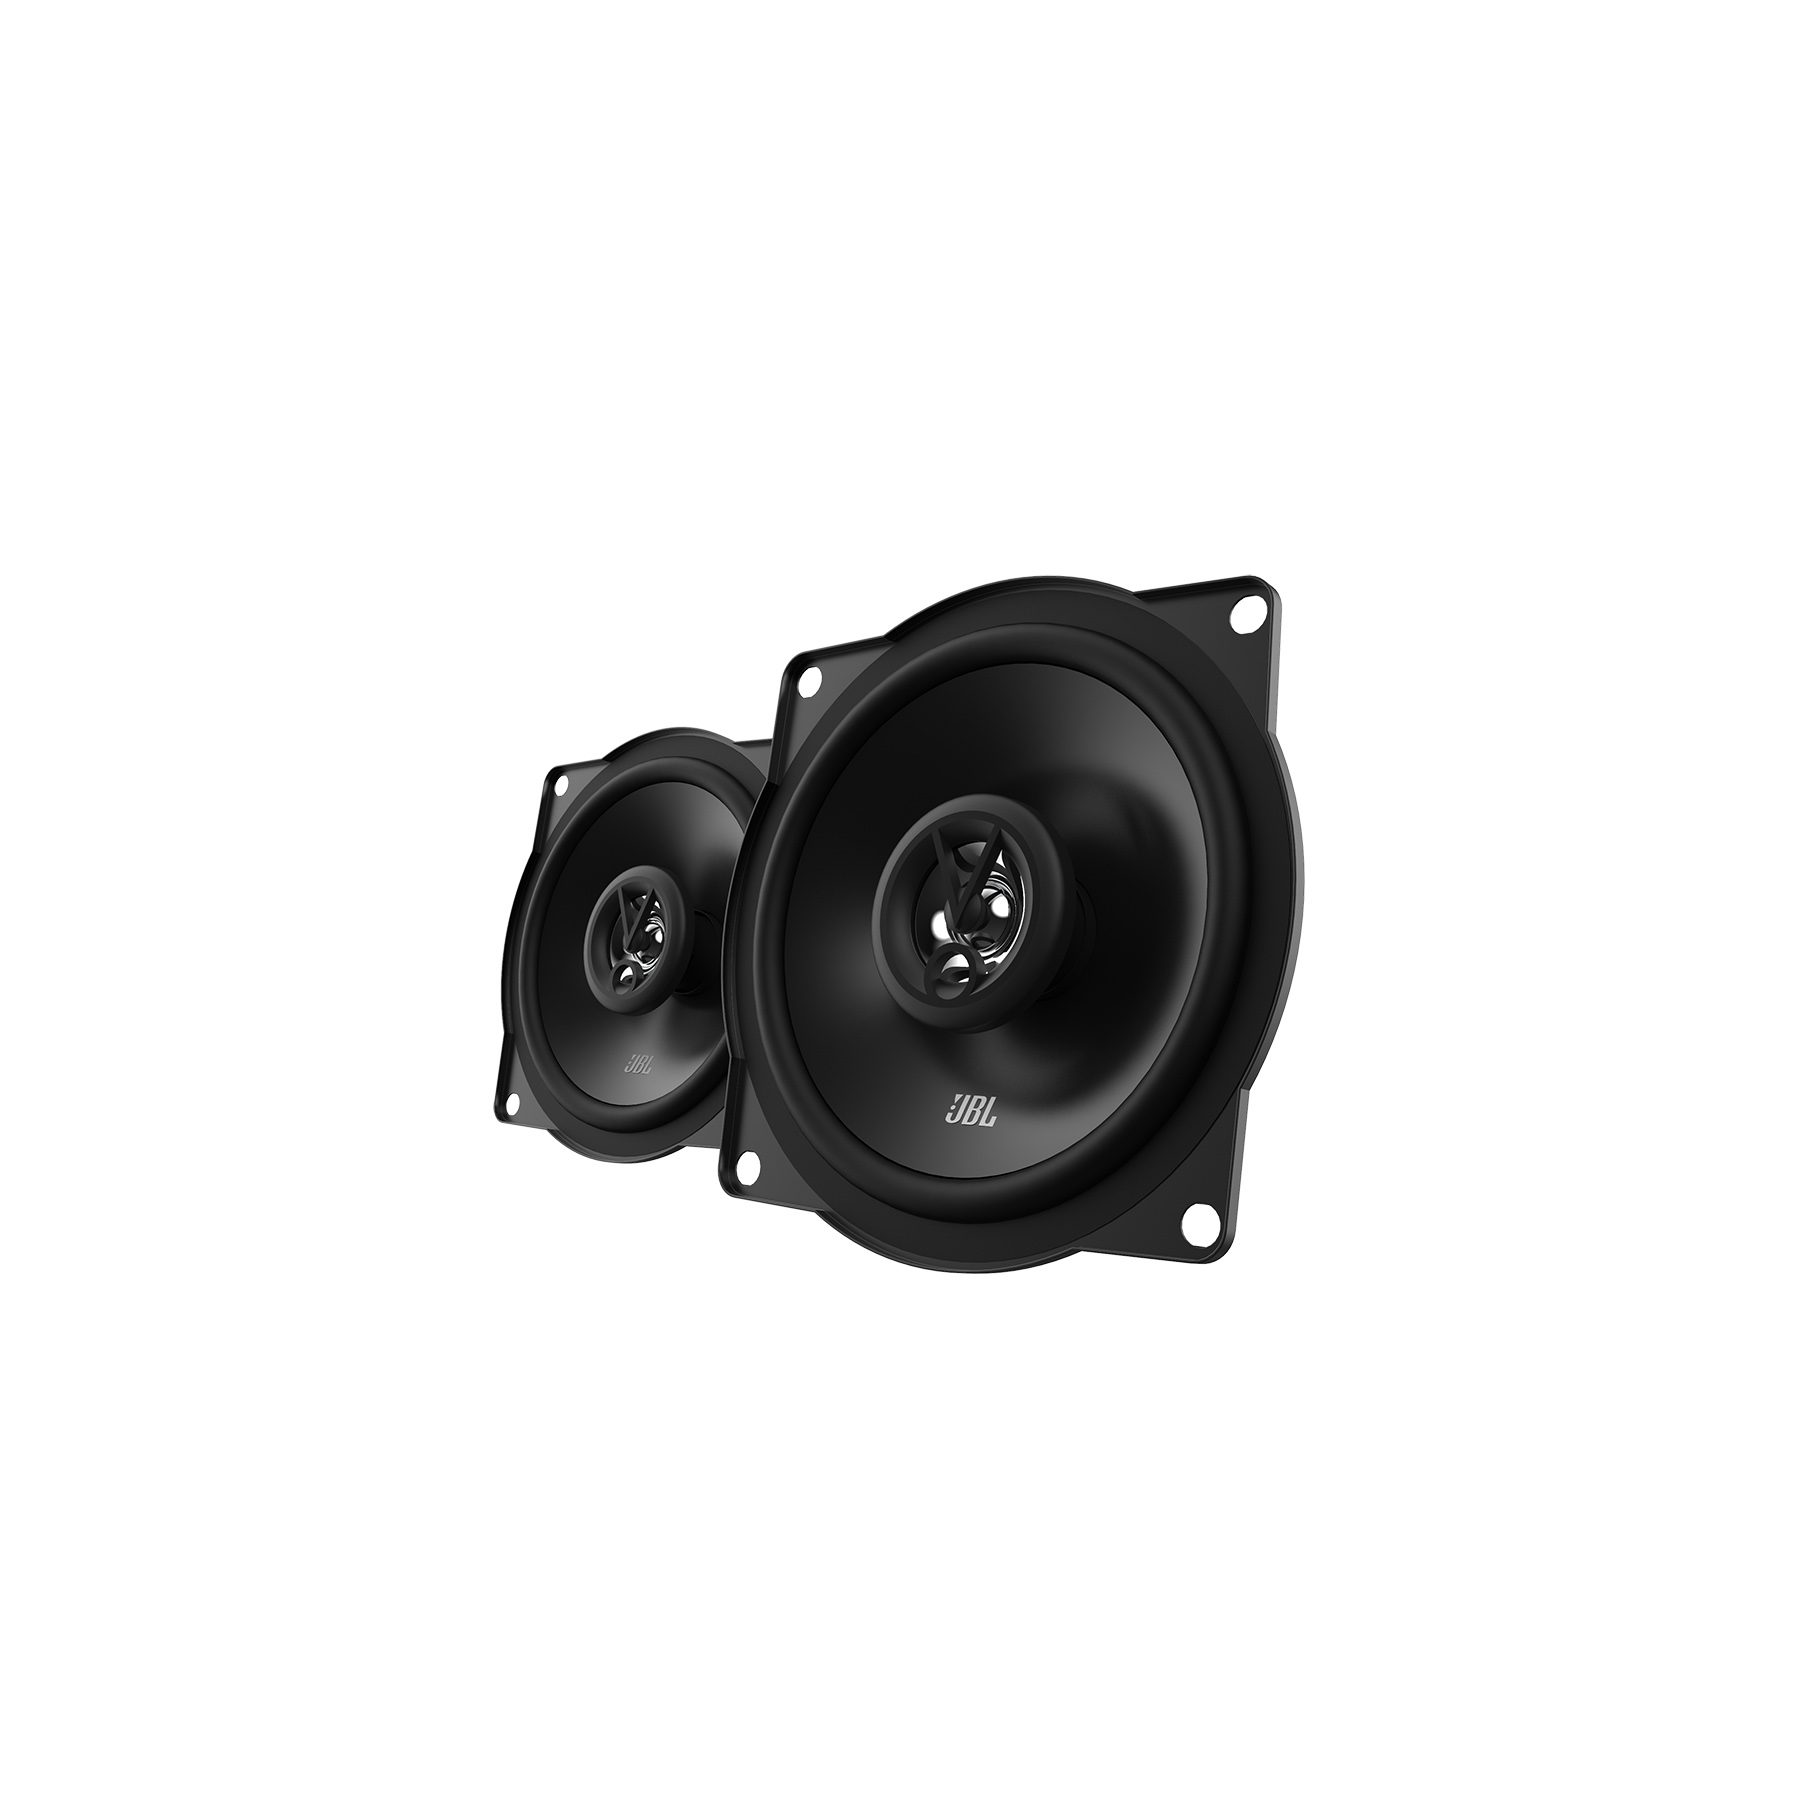 Stage1 51F, Car Speakers, 5.25″ Coaxial, No Grill